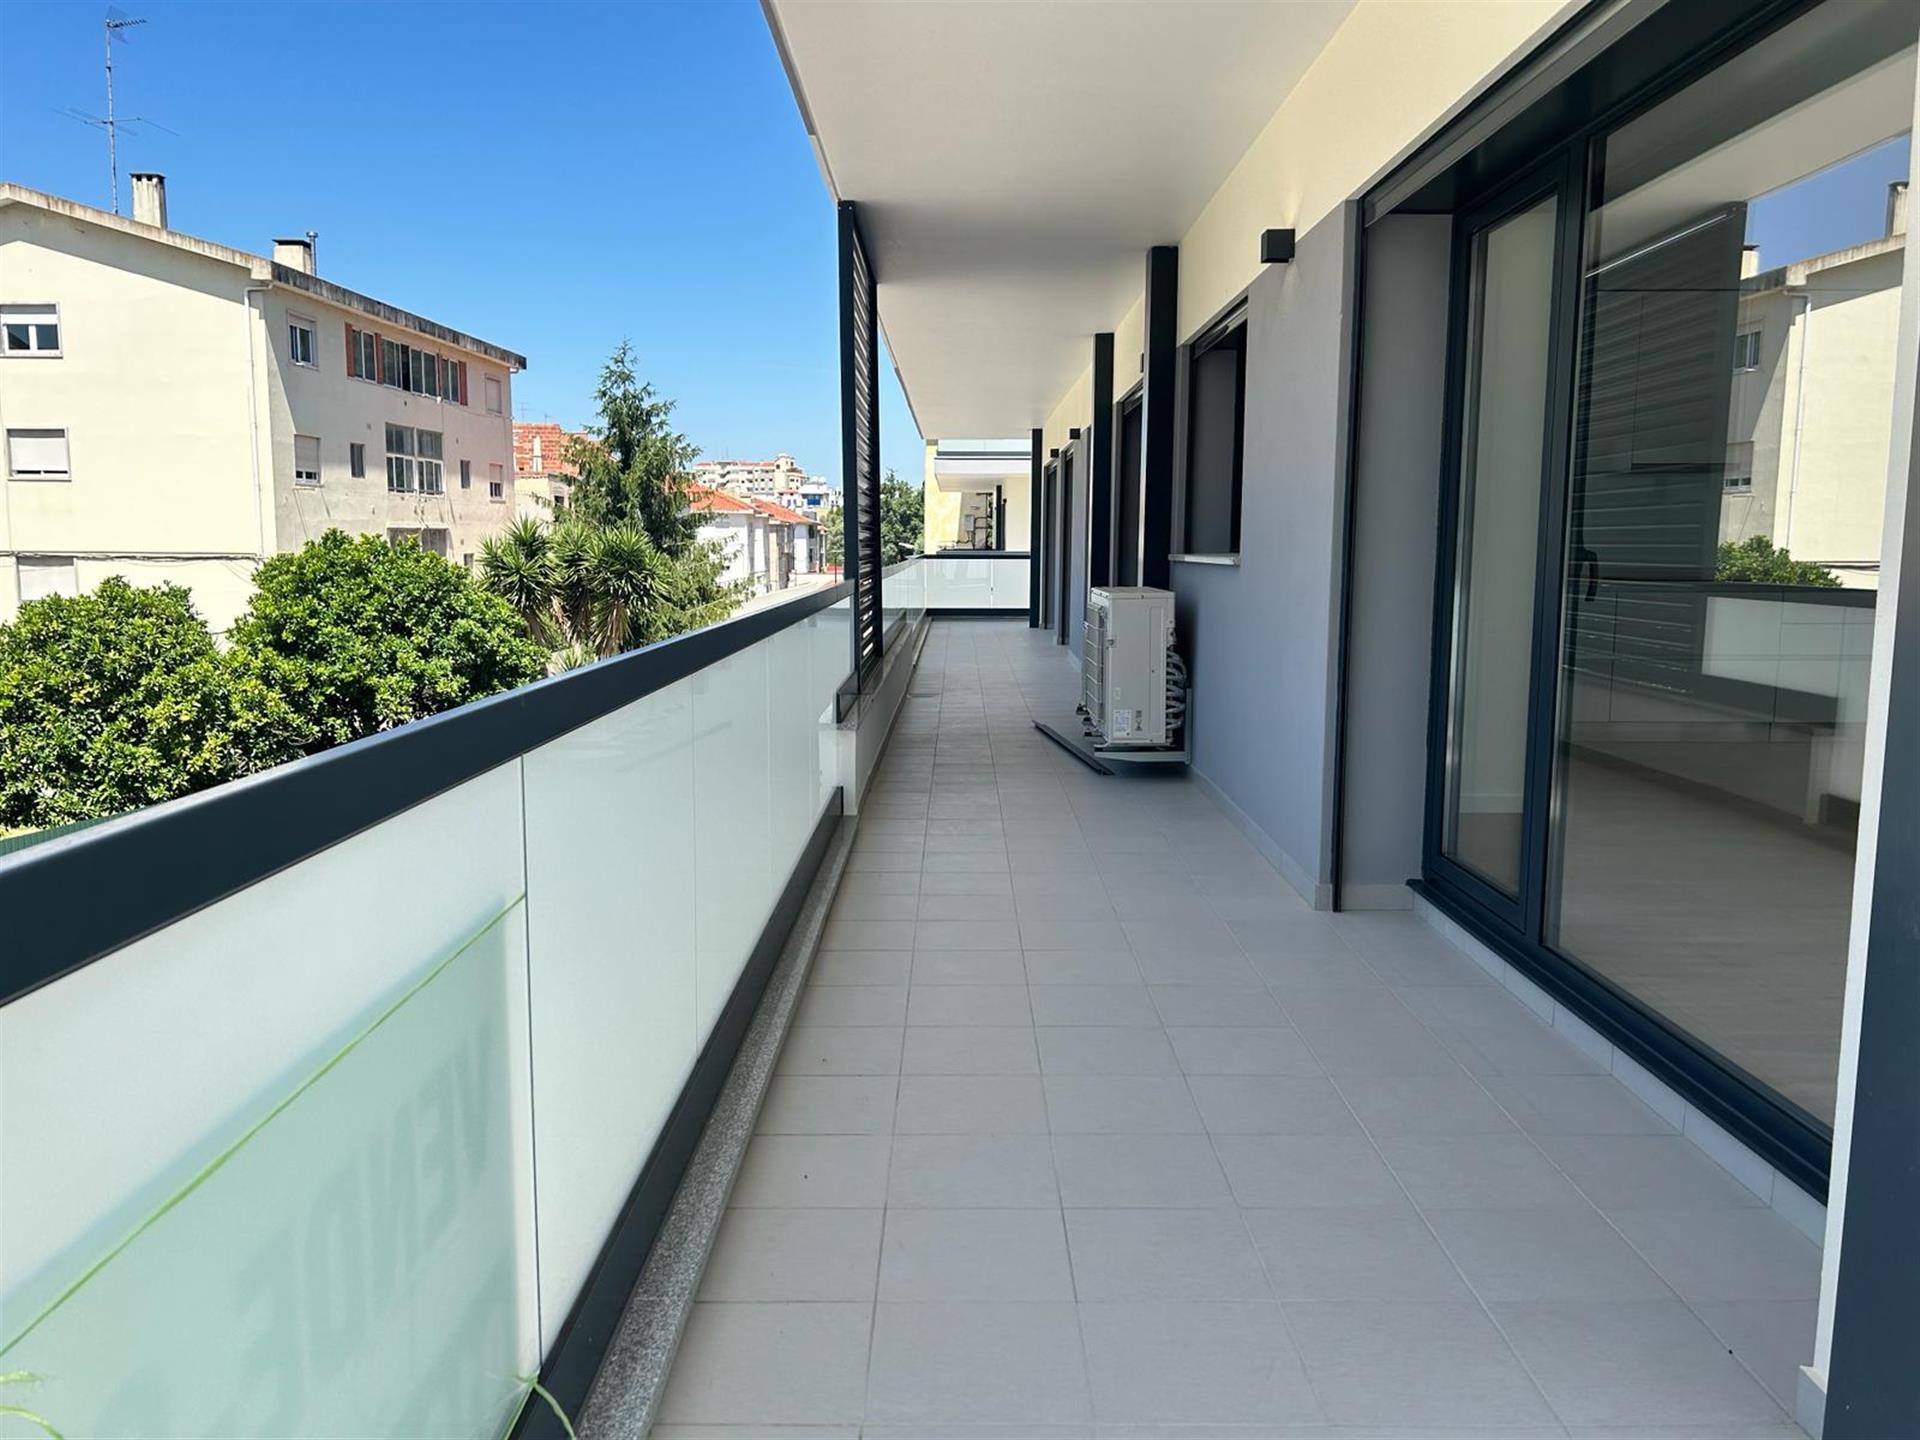 Superior quality 4 bedroom flat with a privileged location in Leiria 